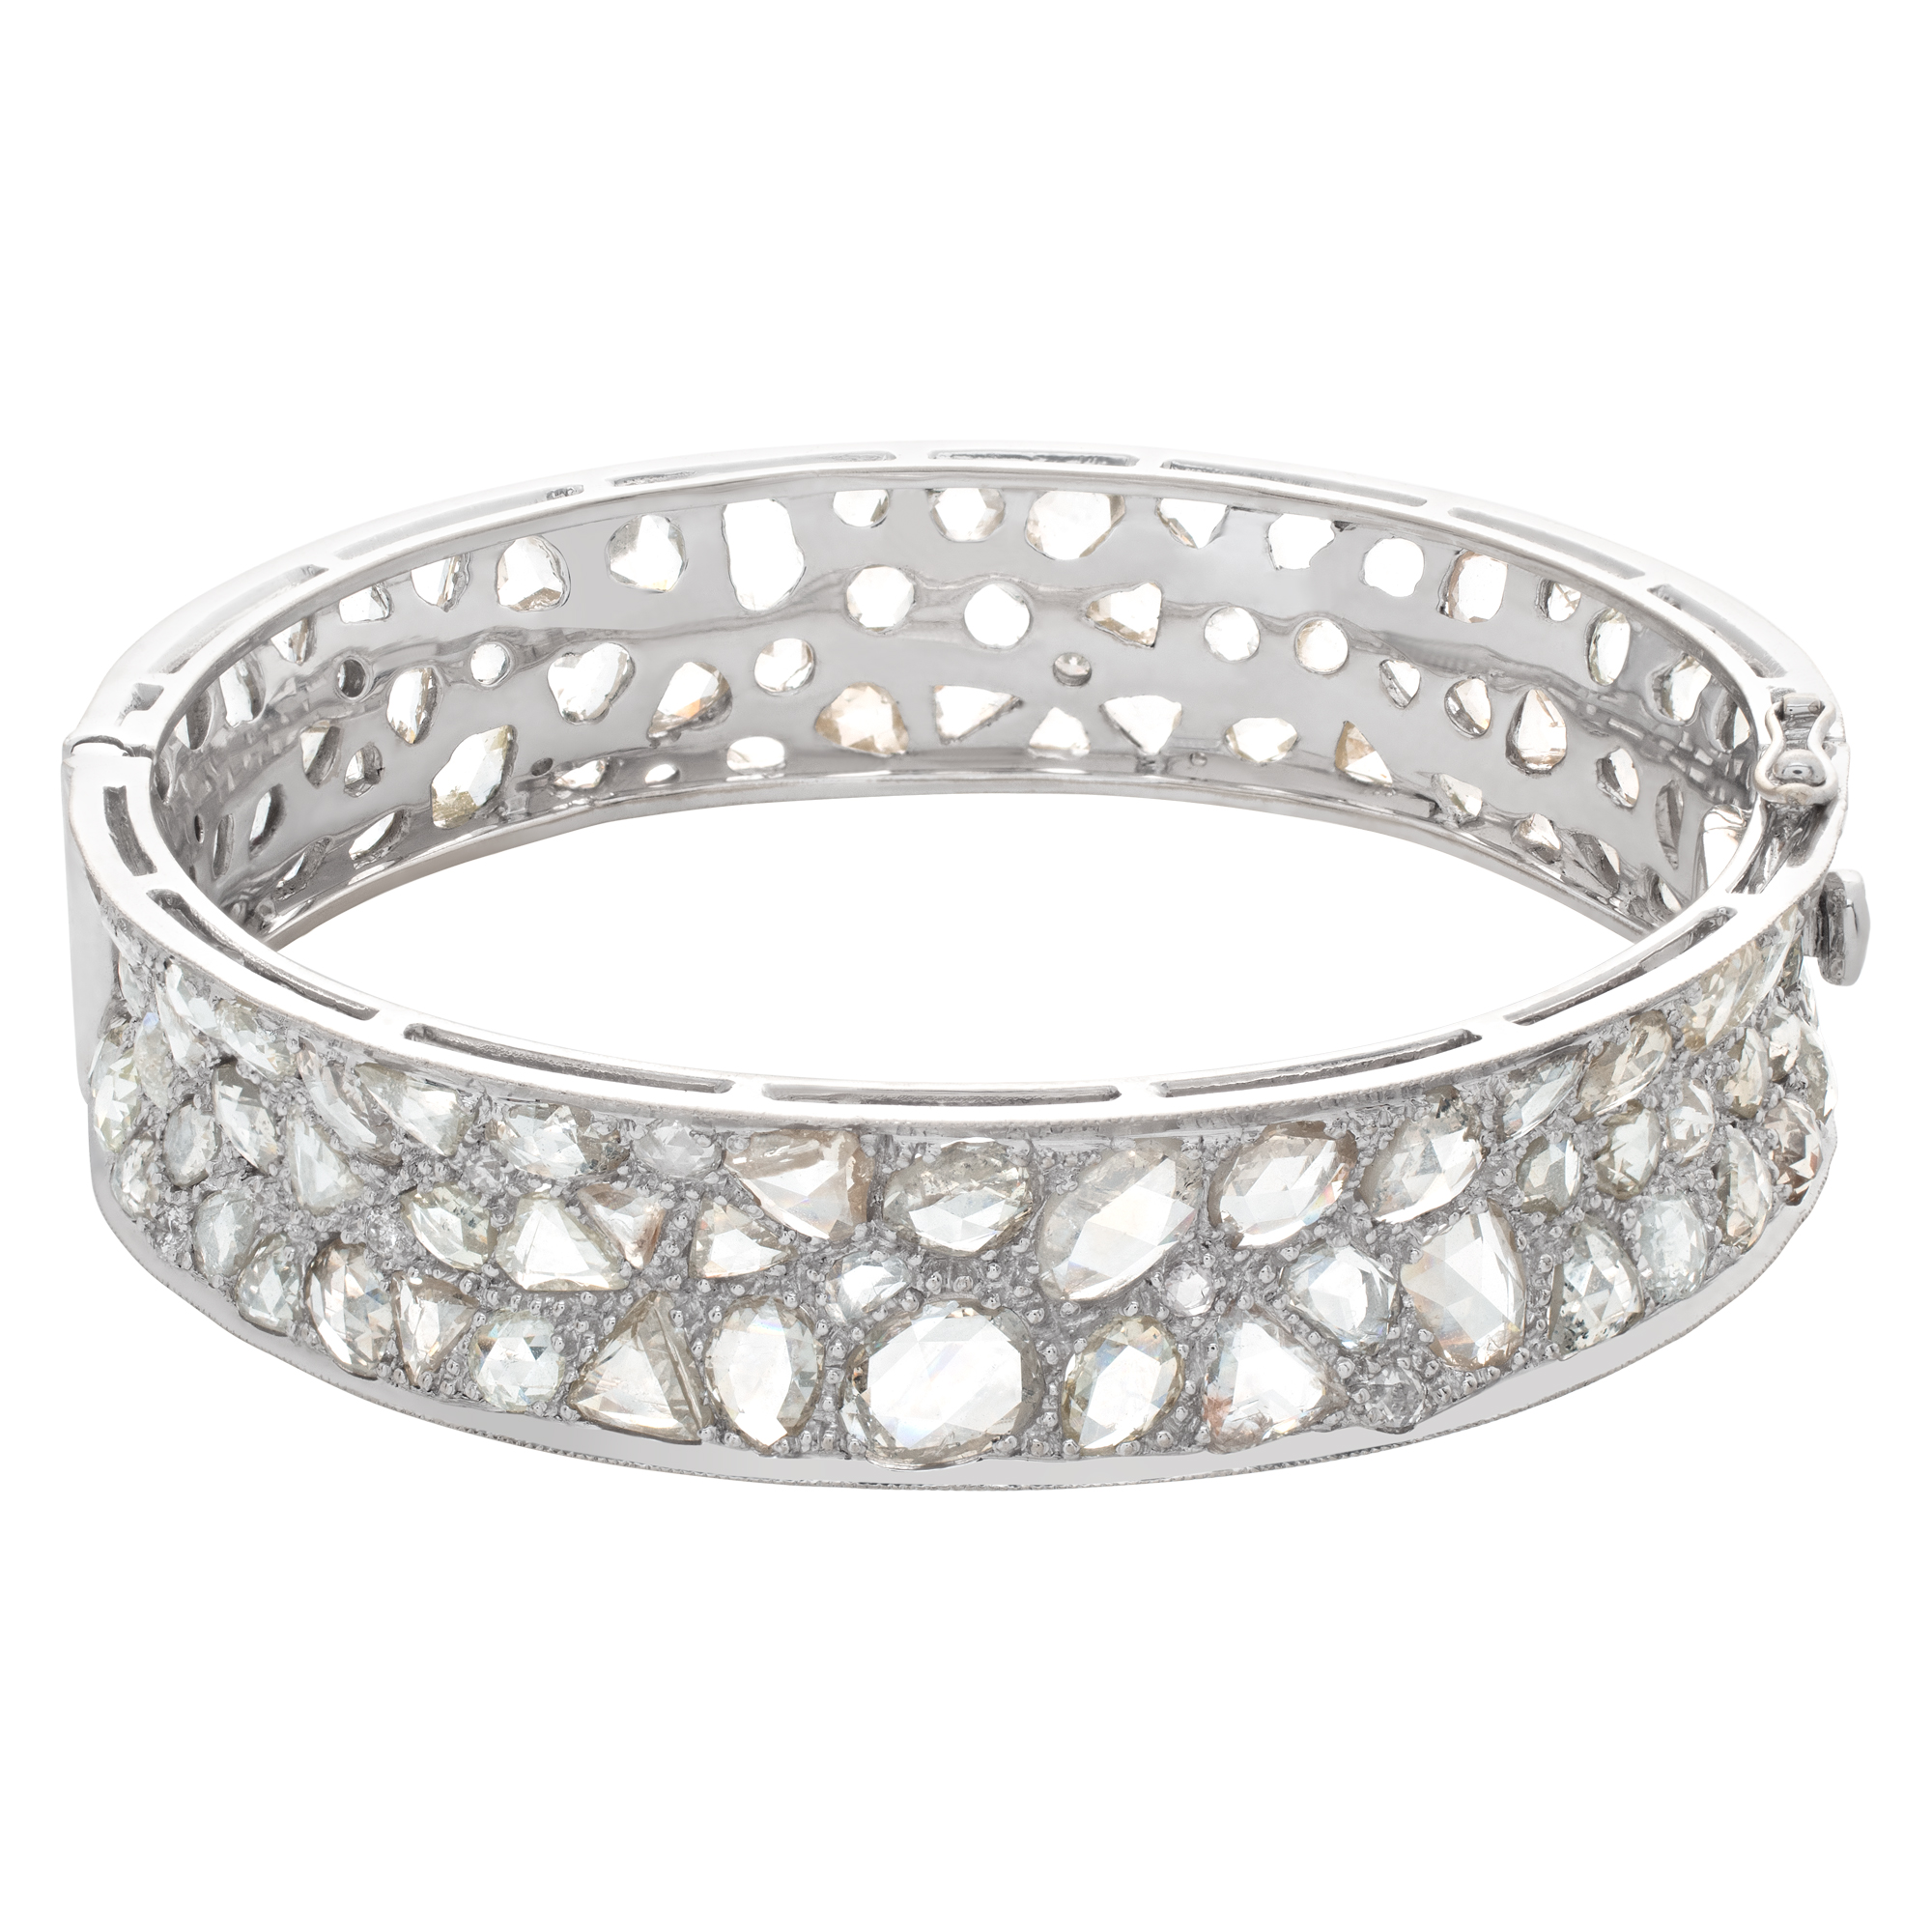 Bangle in 18k white gold with rose cut diamonds